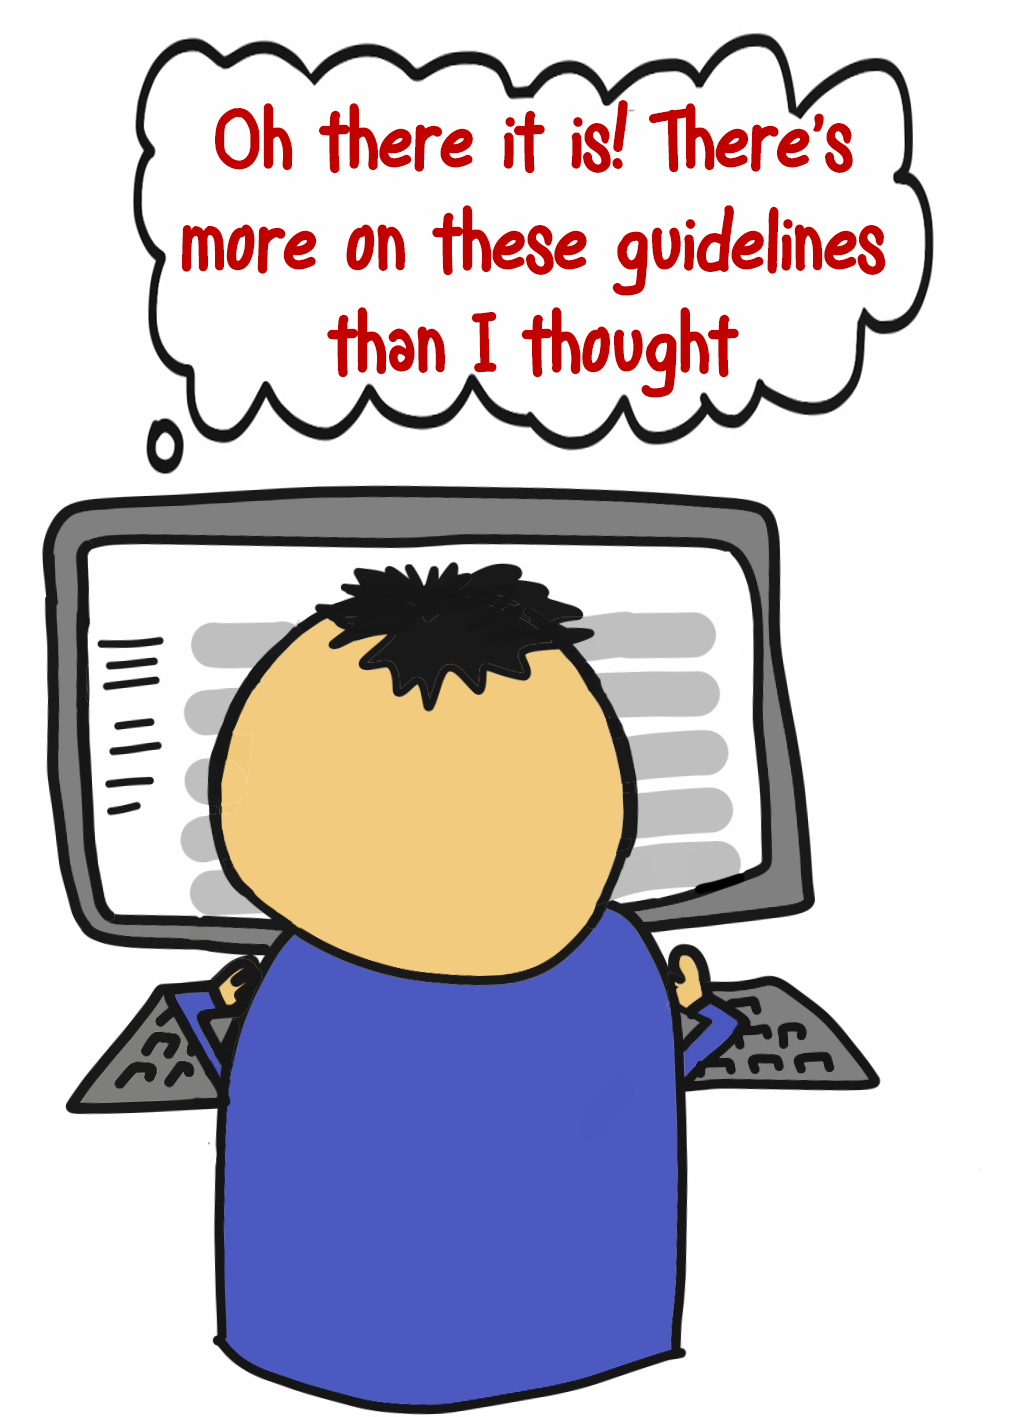 Students looking at guidelines and thinking "Oh there it is! There's more on these guidelines than I thought"